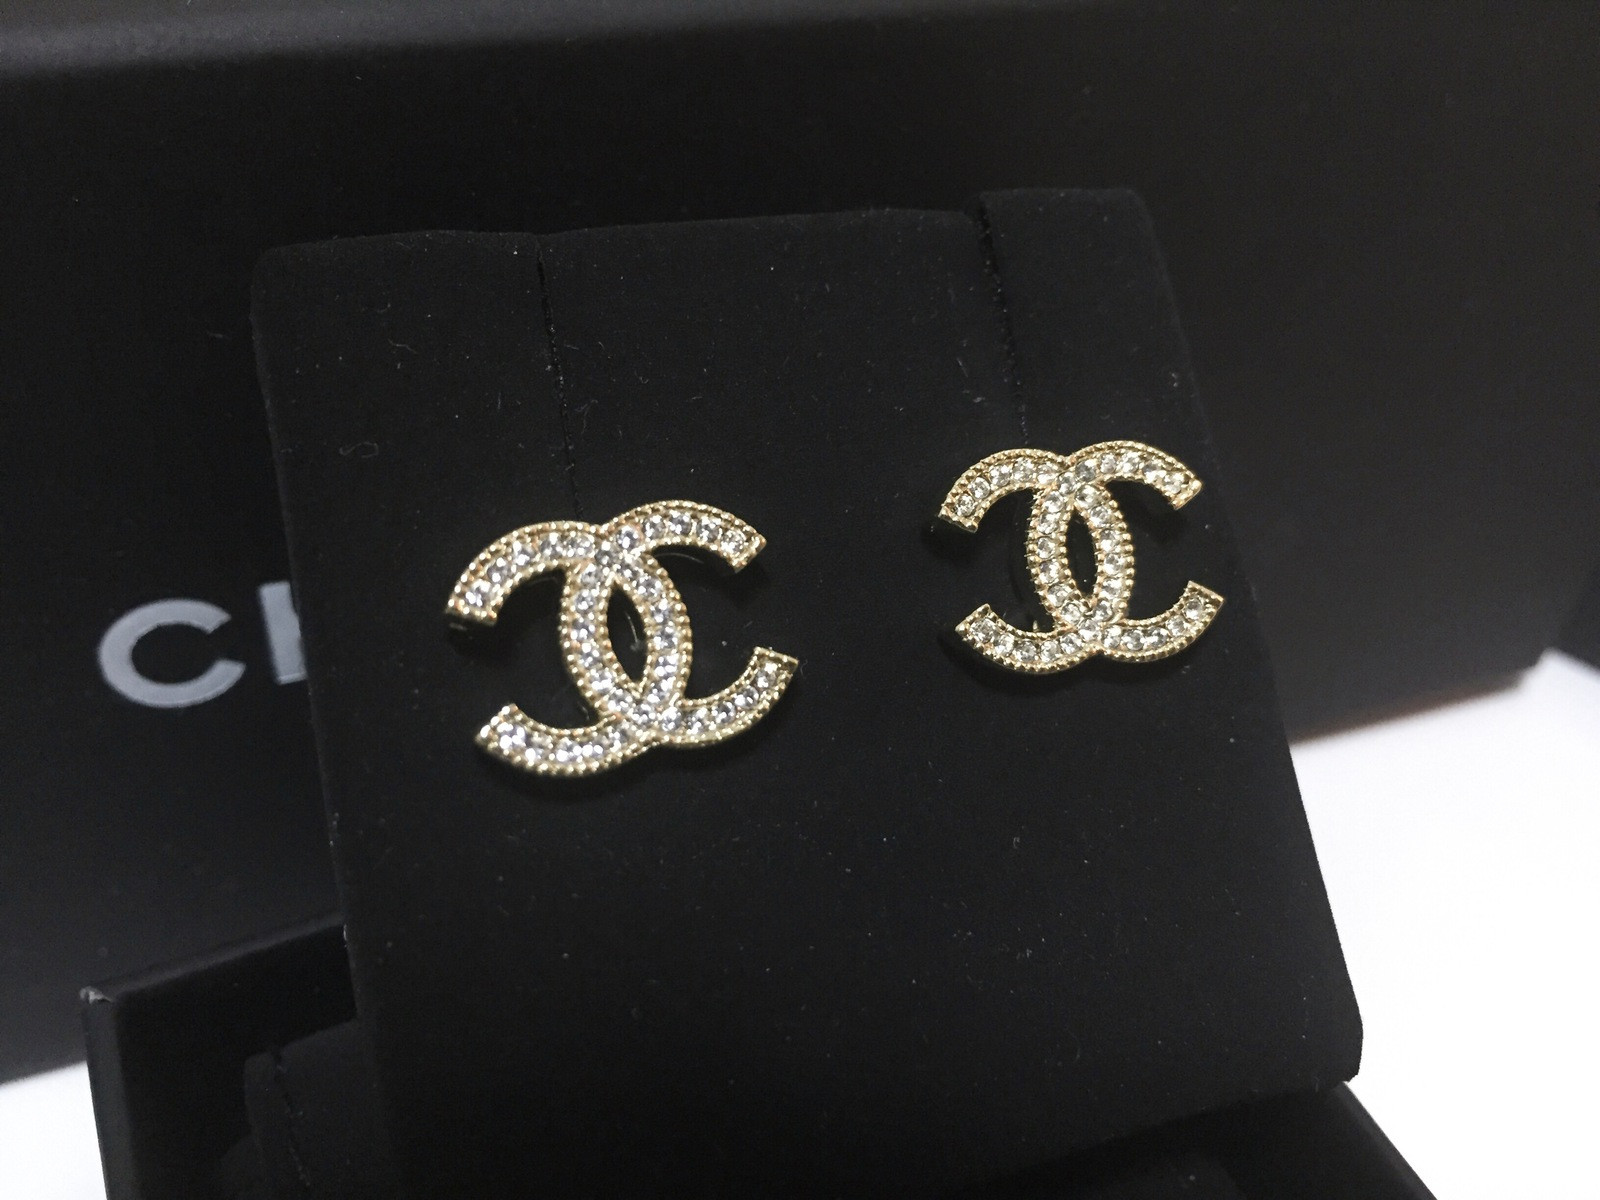 Chanel Cc Logo Earrings
 AUTHENTIC CHANEL 2015 CC Logo Classic Crystal Gold Stud